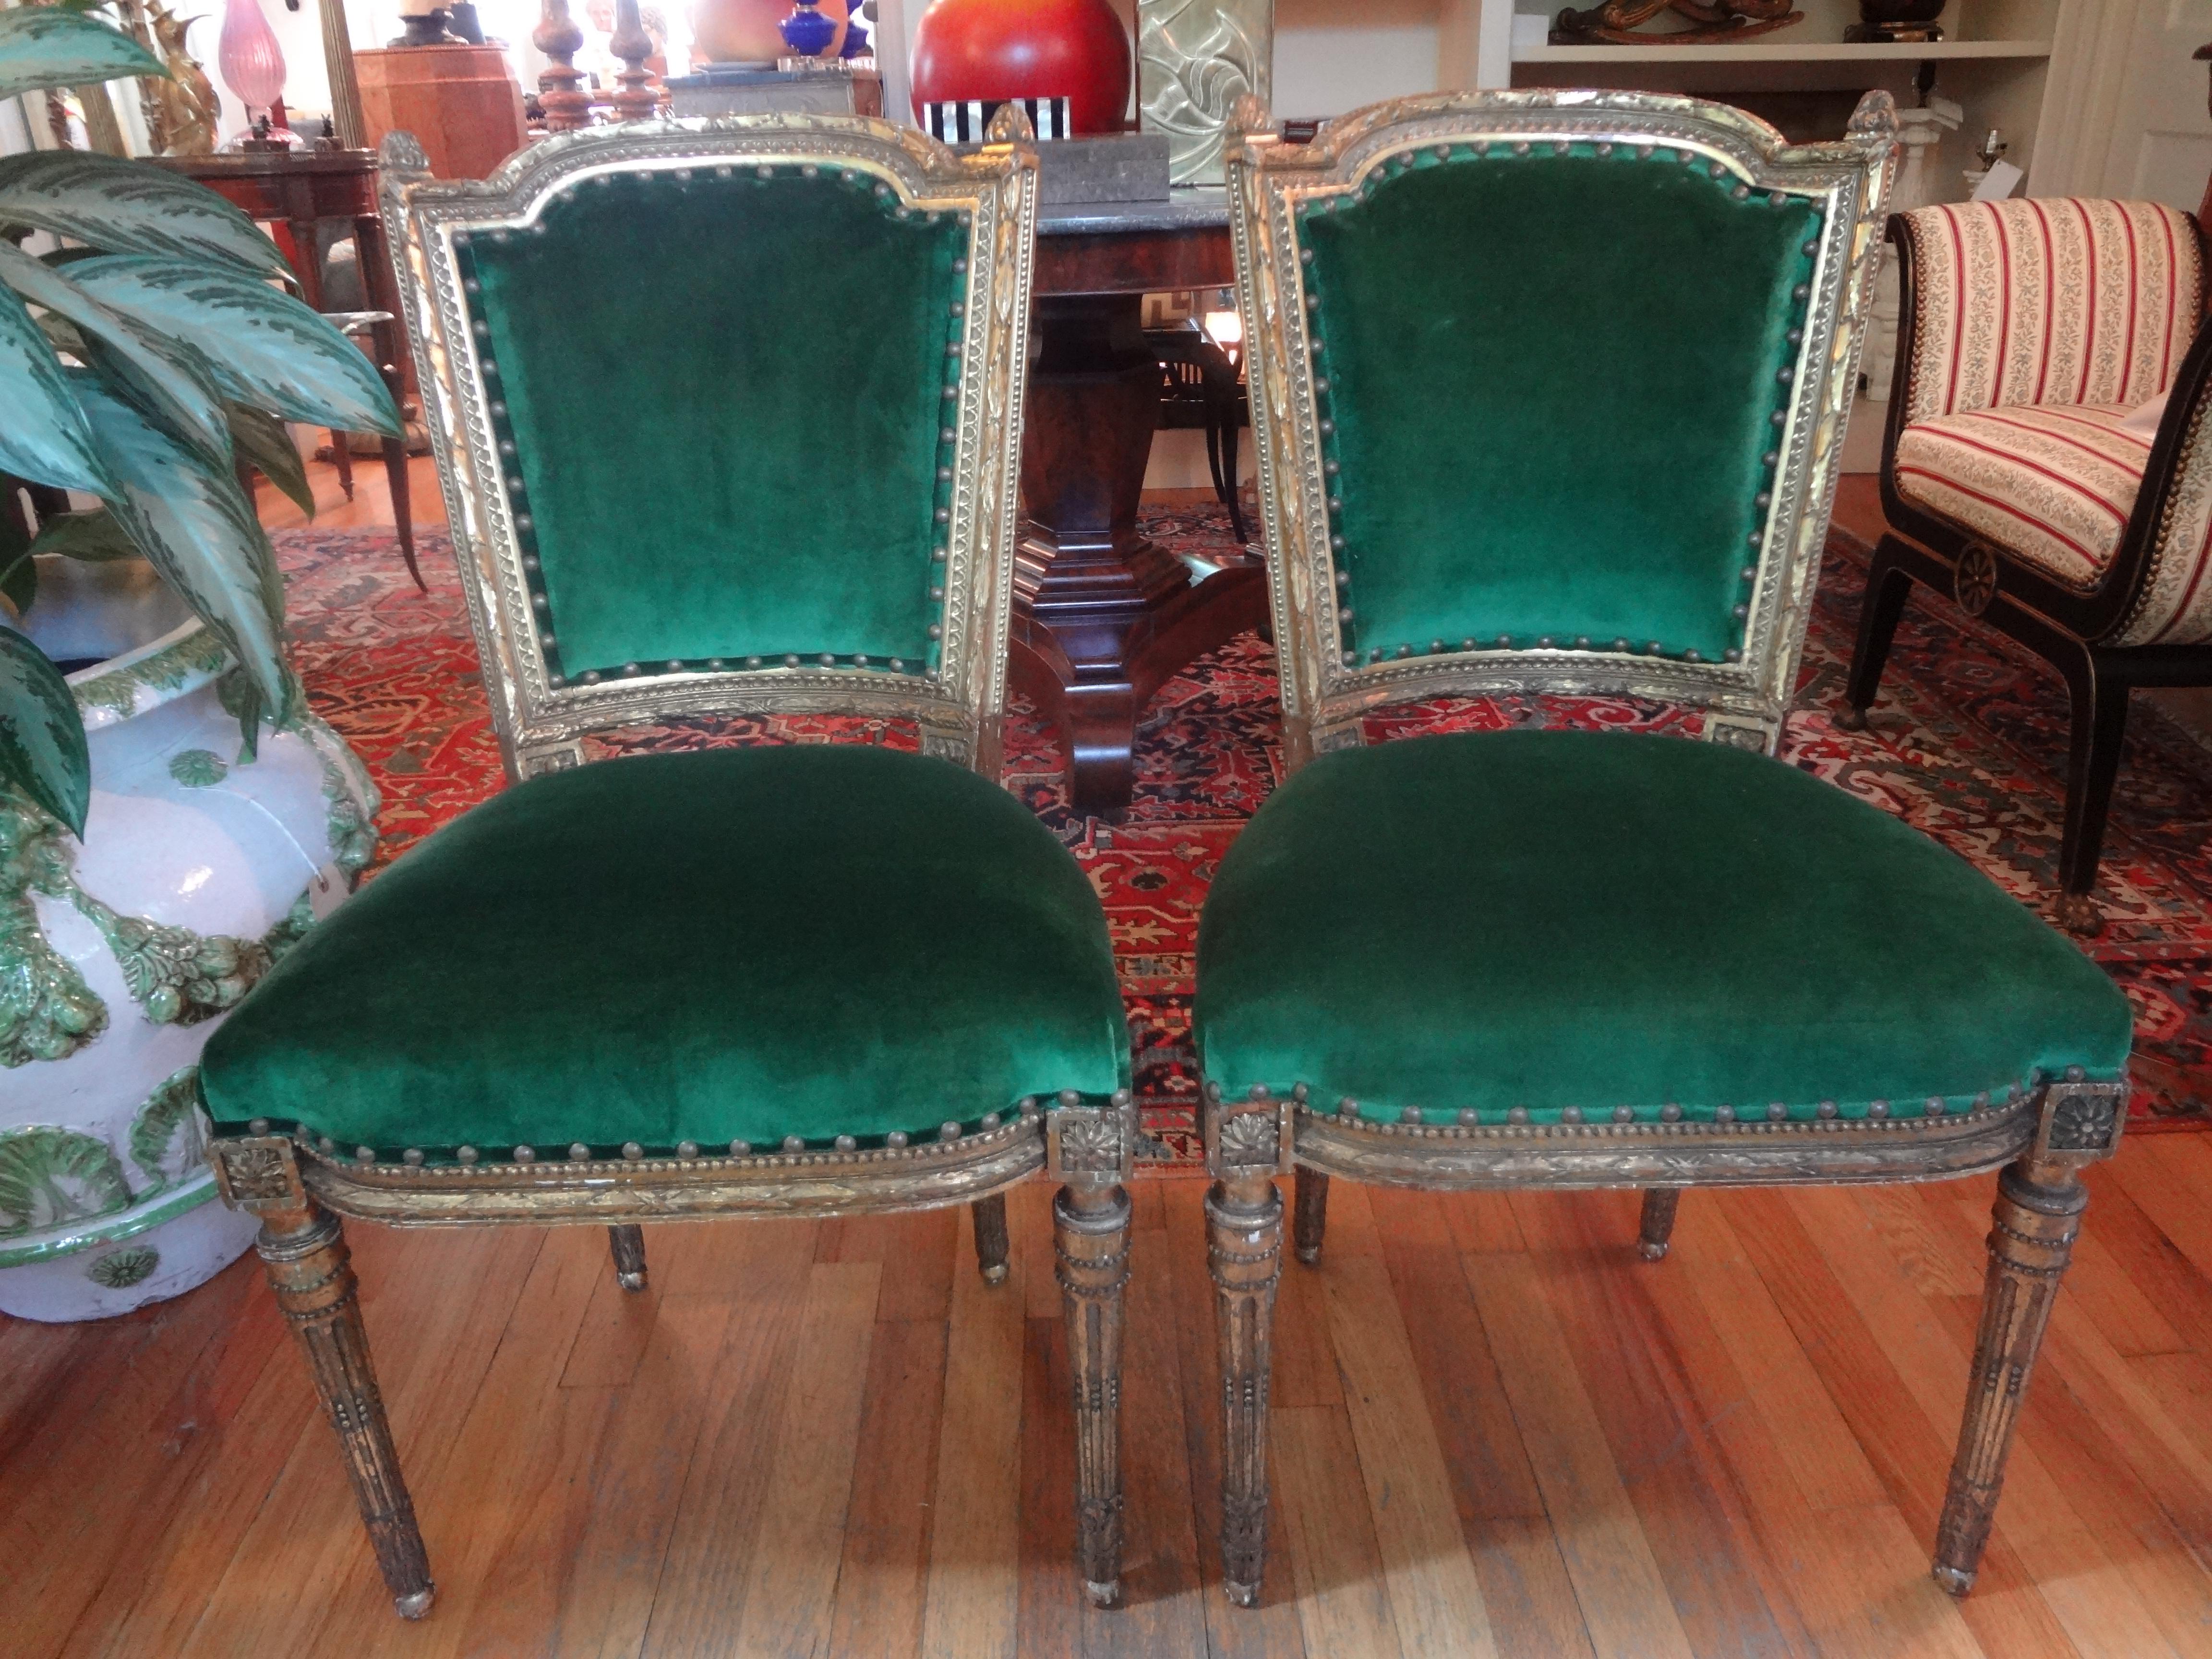 Fabulous pair of Mid-19th Century French Louis XVI style giltwood side chairs. These highly detailed French gilt chairs have beautifully detailed identical front and rear legs (superior quality) and have been professionally upholstered in emerald